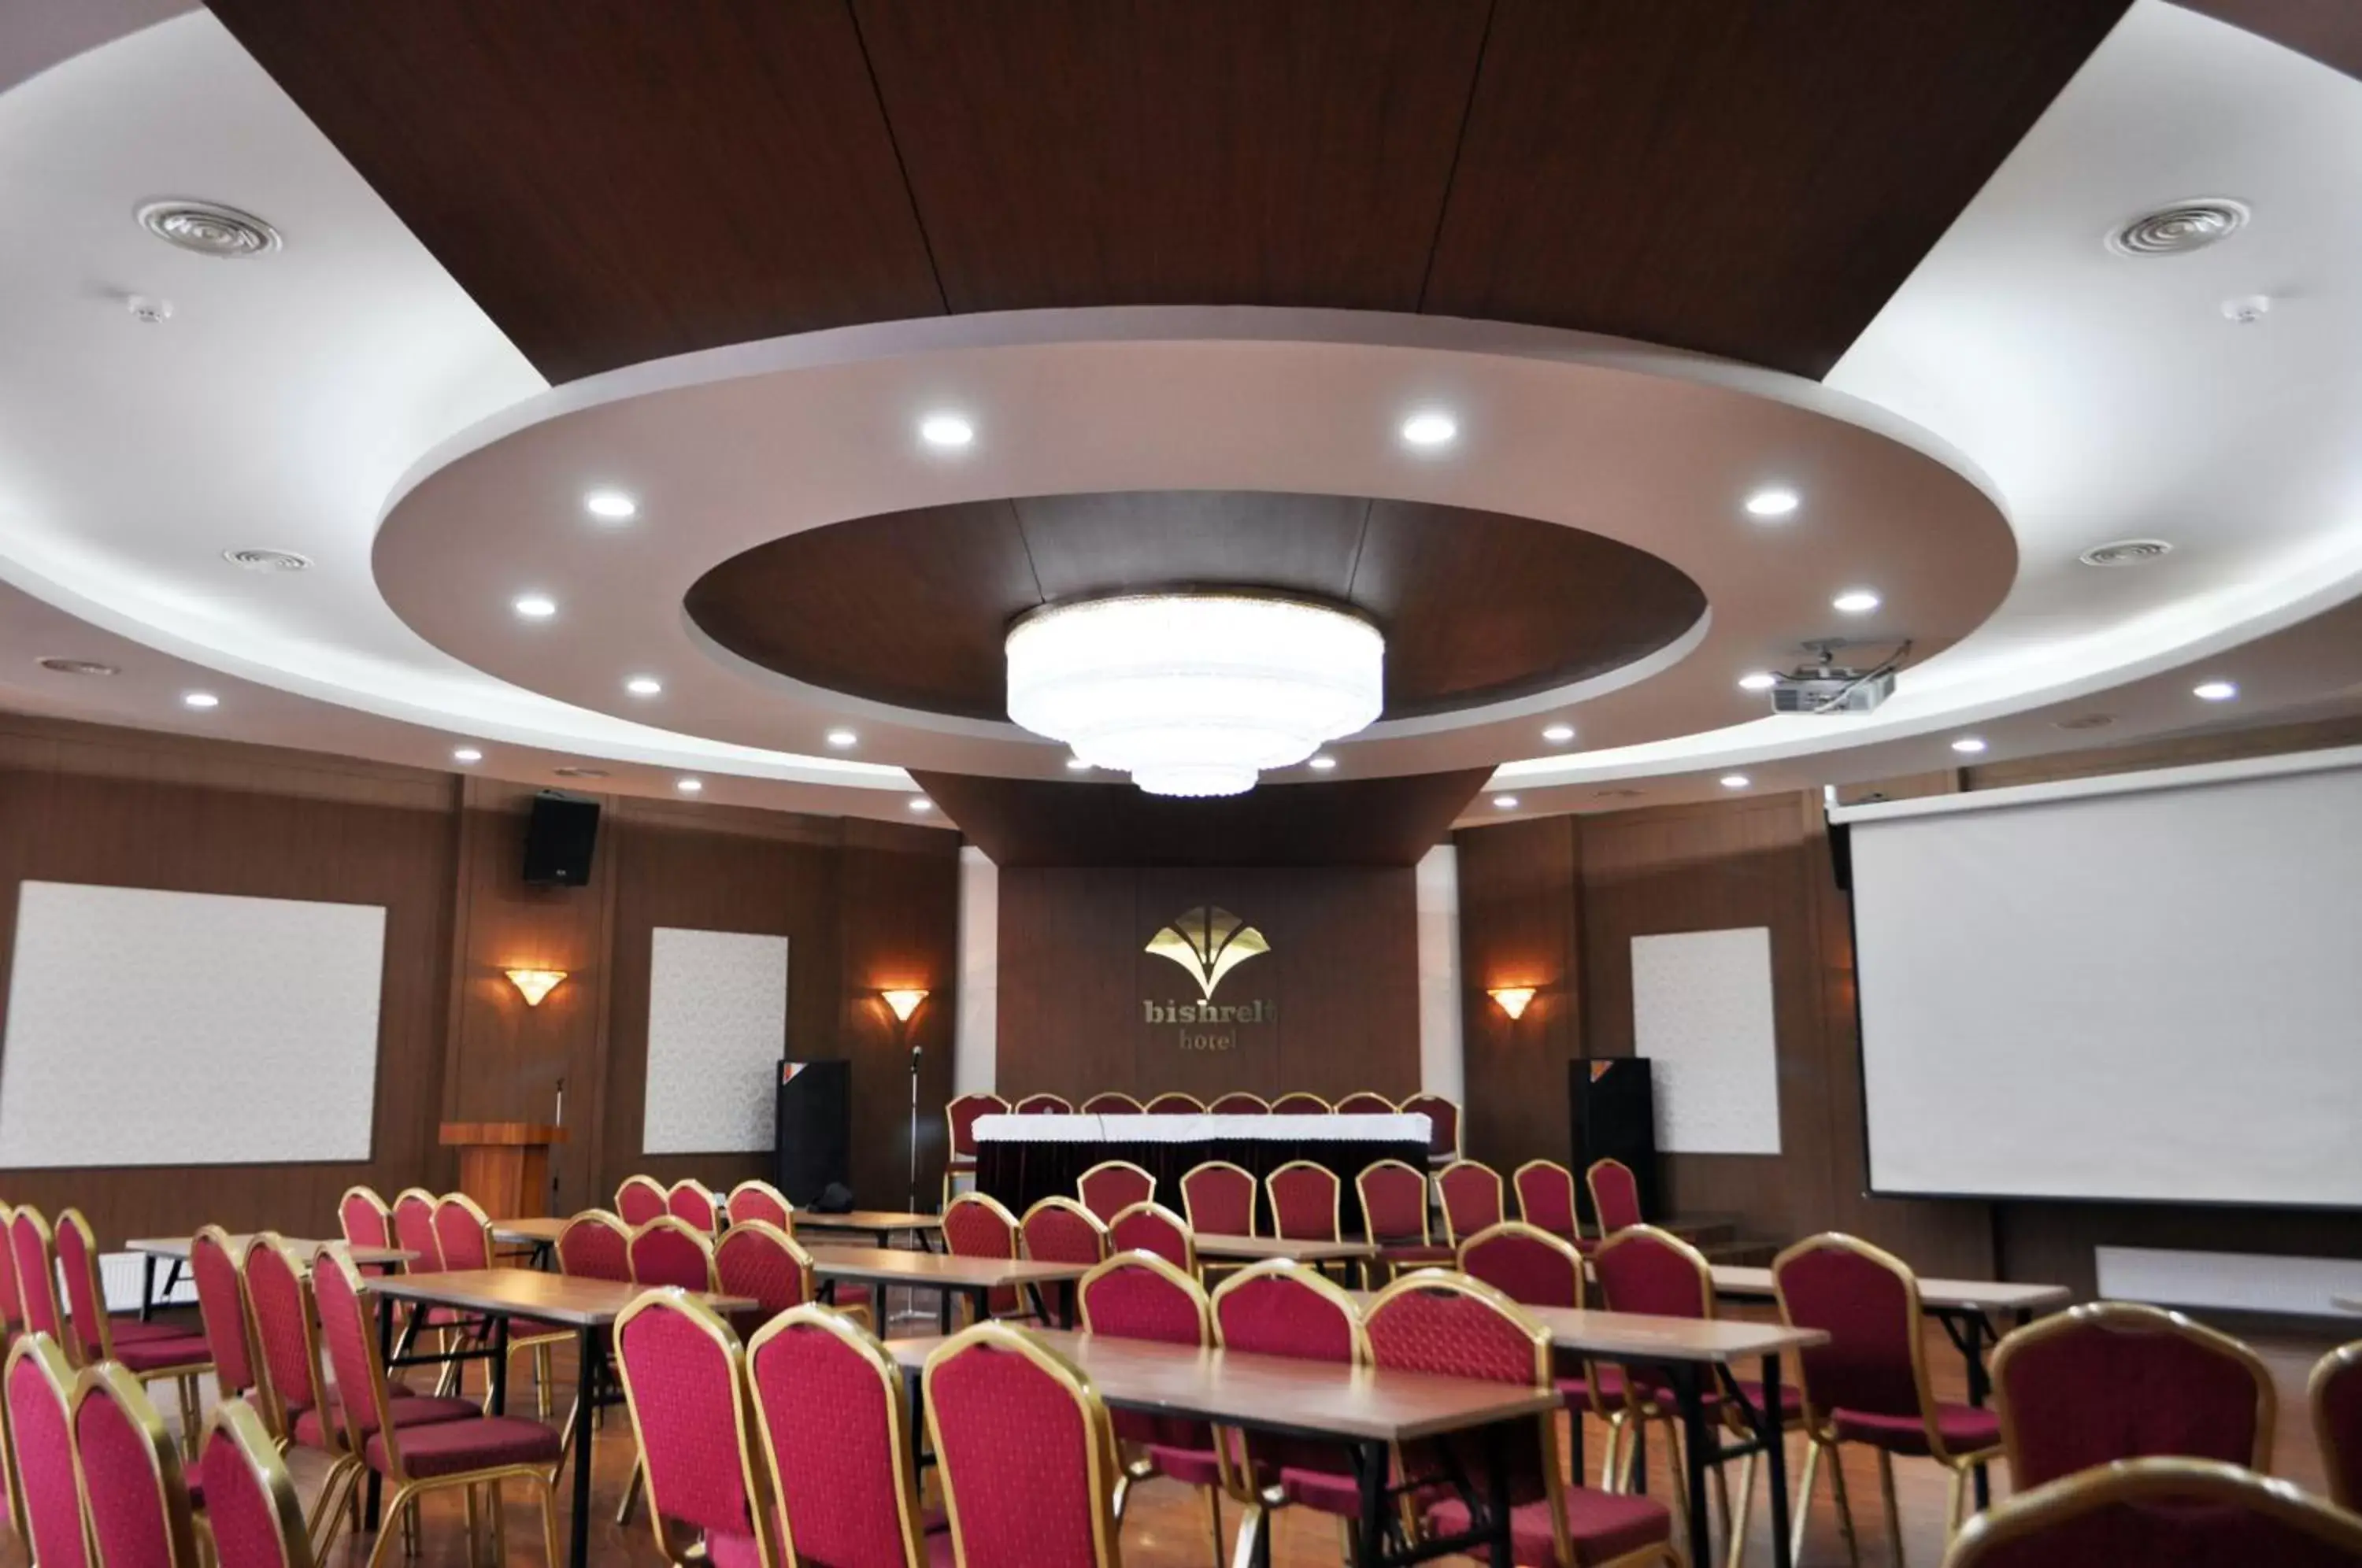 Business facilities in Bishrelt Hotel